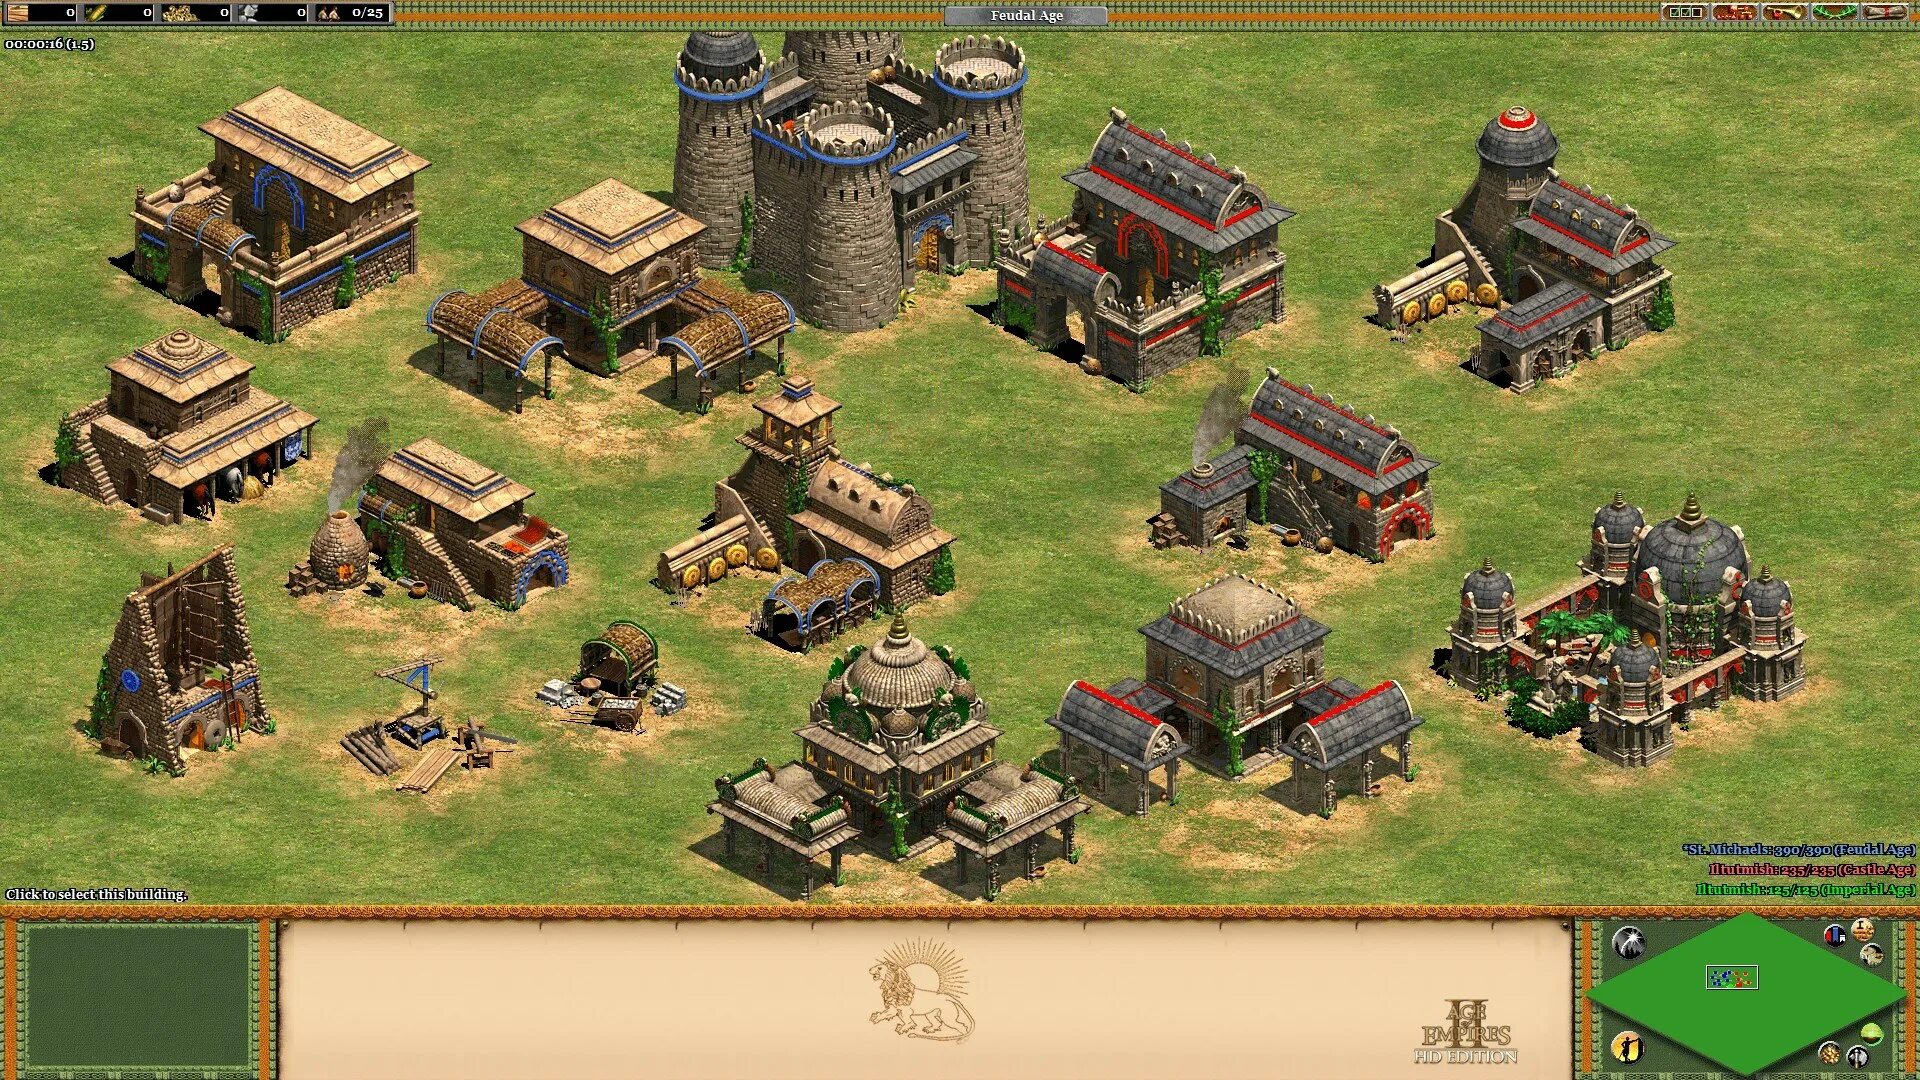 AOE 2 Wonders. Age of Empires 2 эпоха королей. Age of Empires 2 Лесопилка. Кузница age of Empires 2. Le age